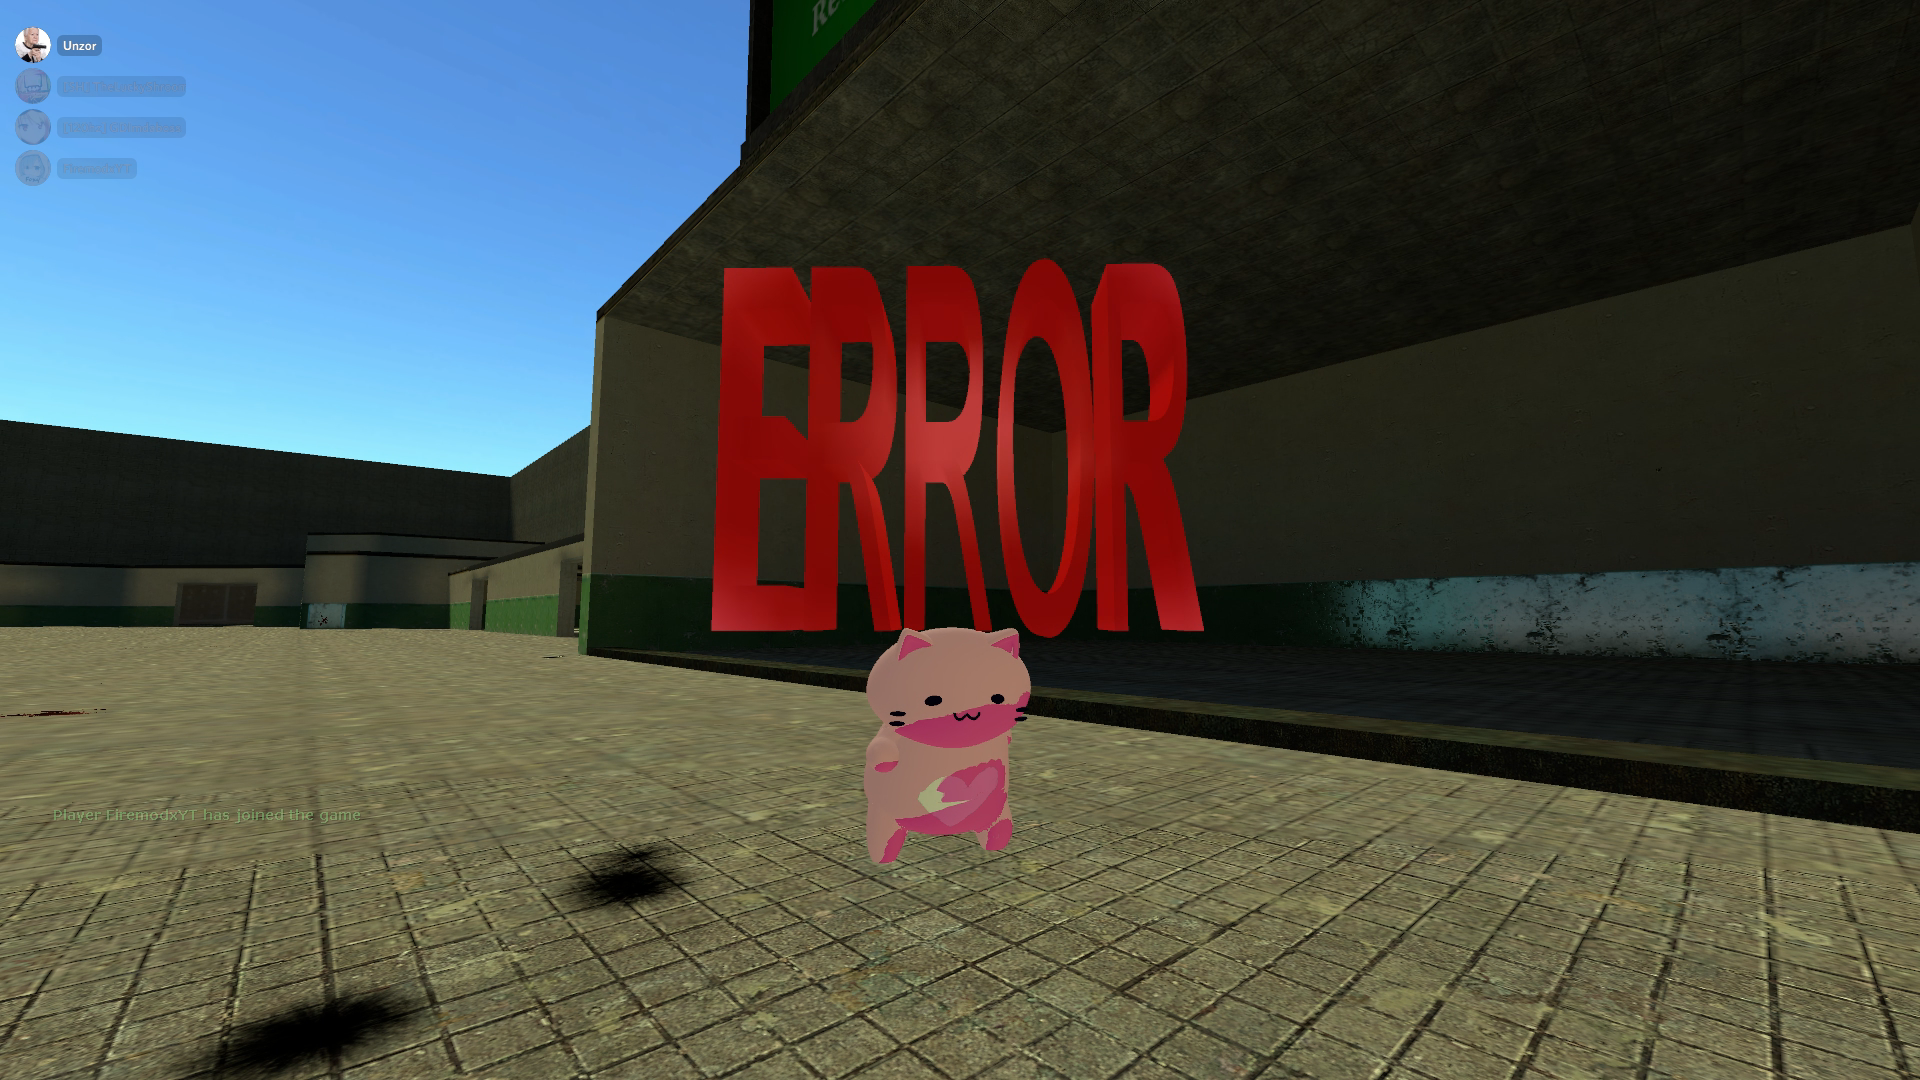 Steam Workshop Unzors Mods Kappa - new guess the character names unfinished roblox